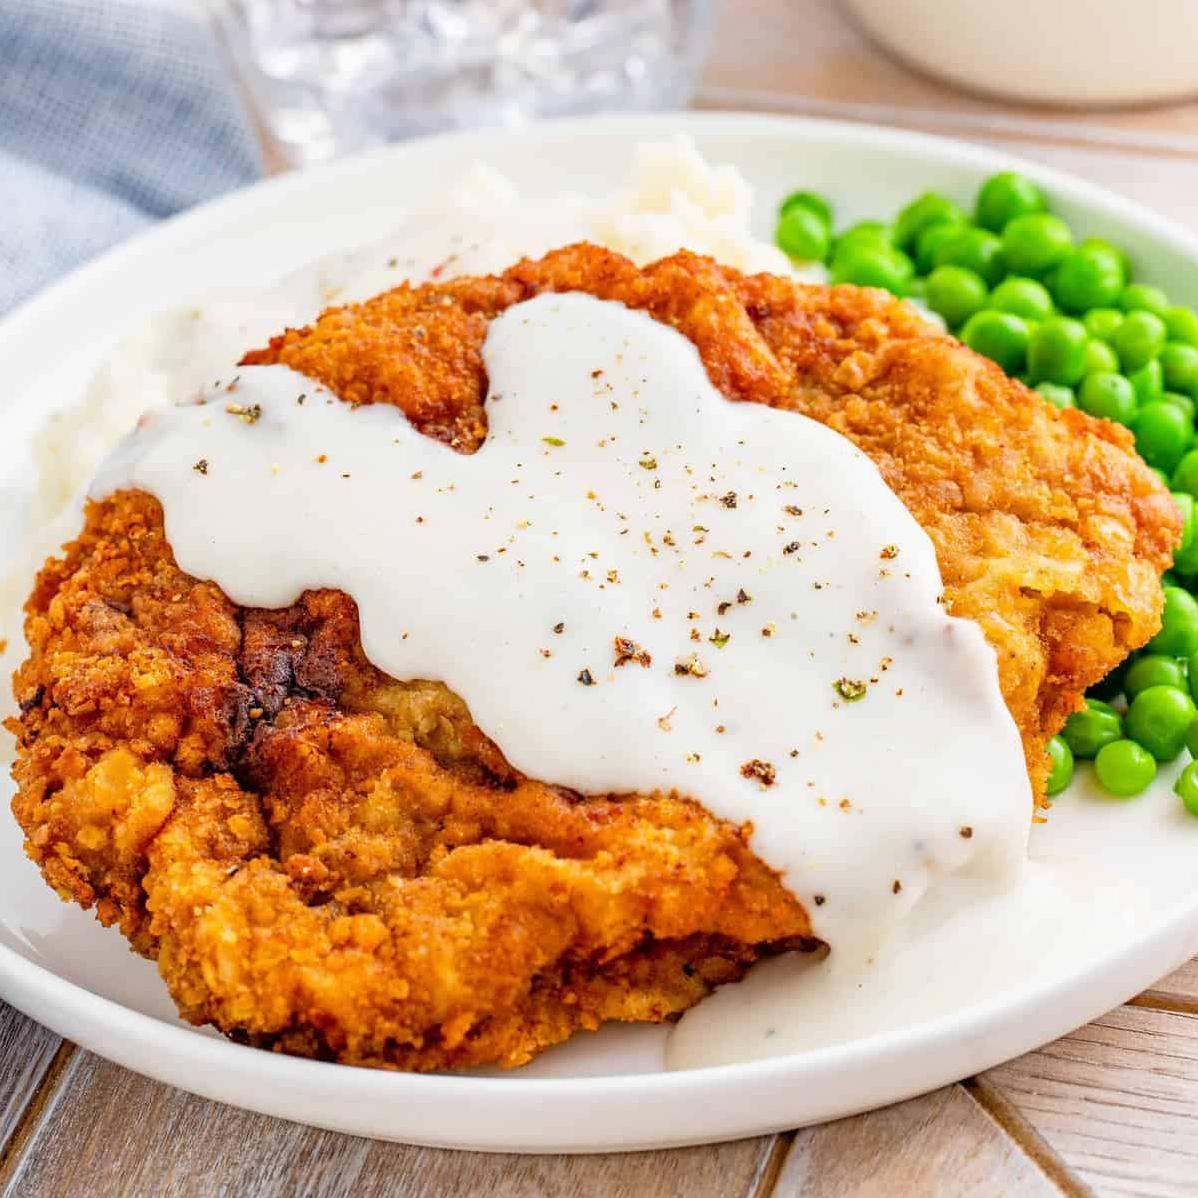  A true Southern classic that's guaranteed to satisfy your cravings.